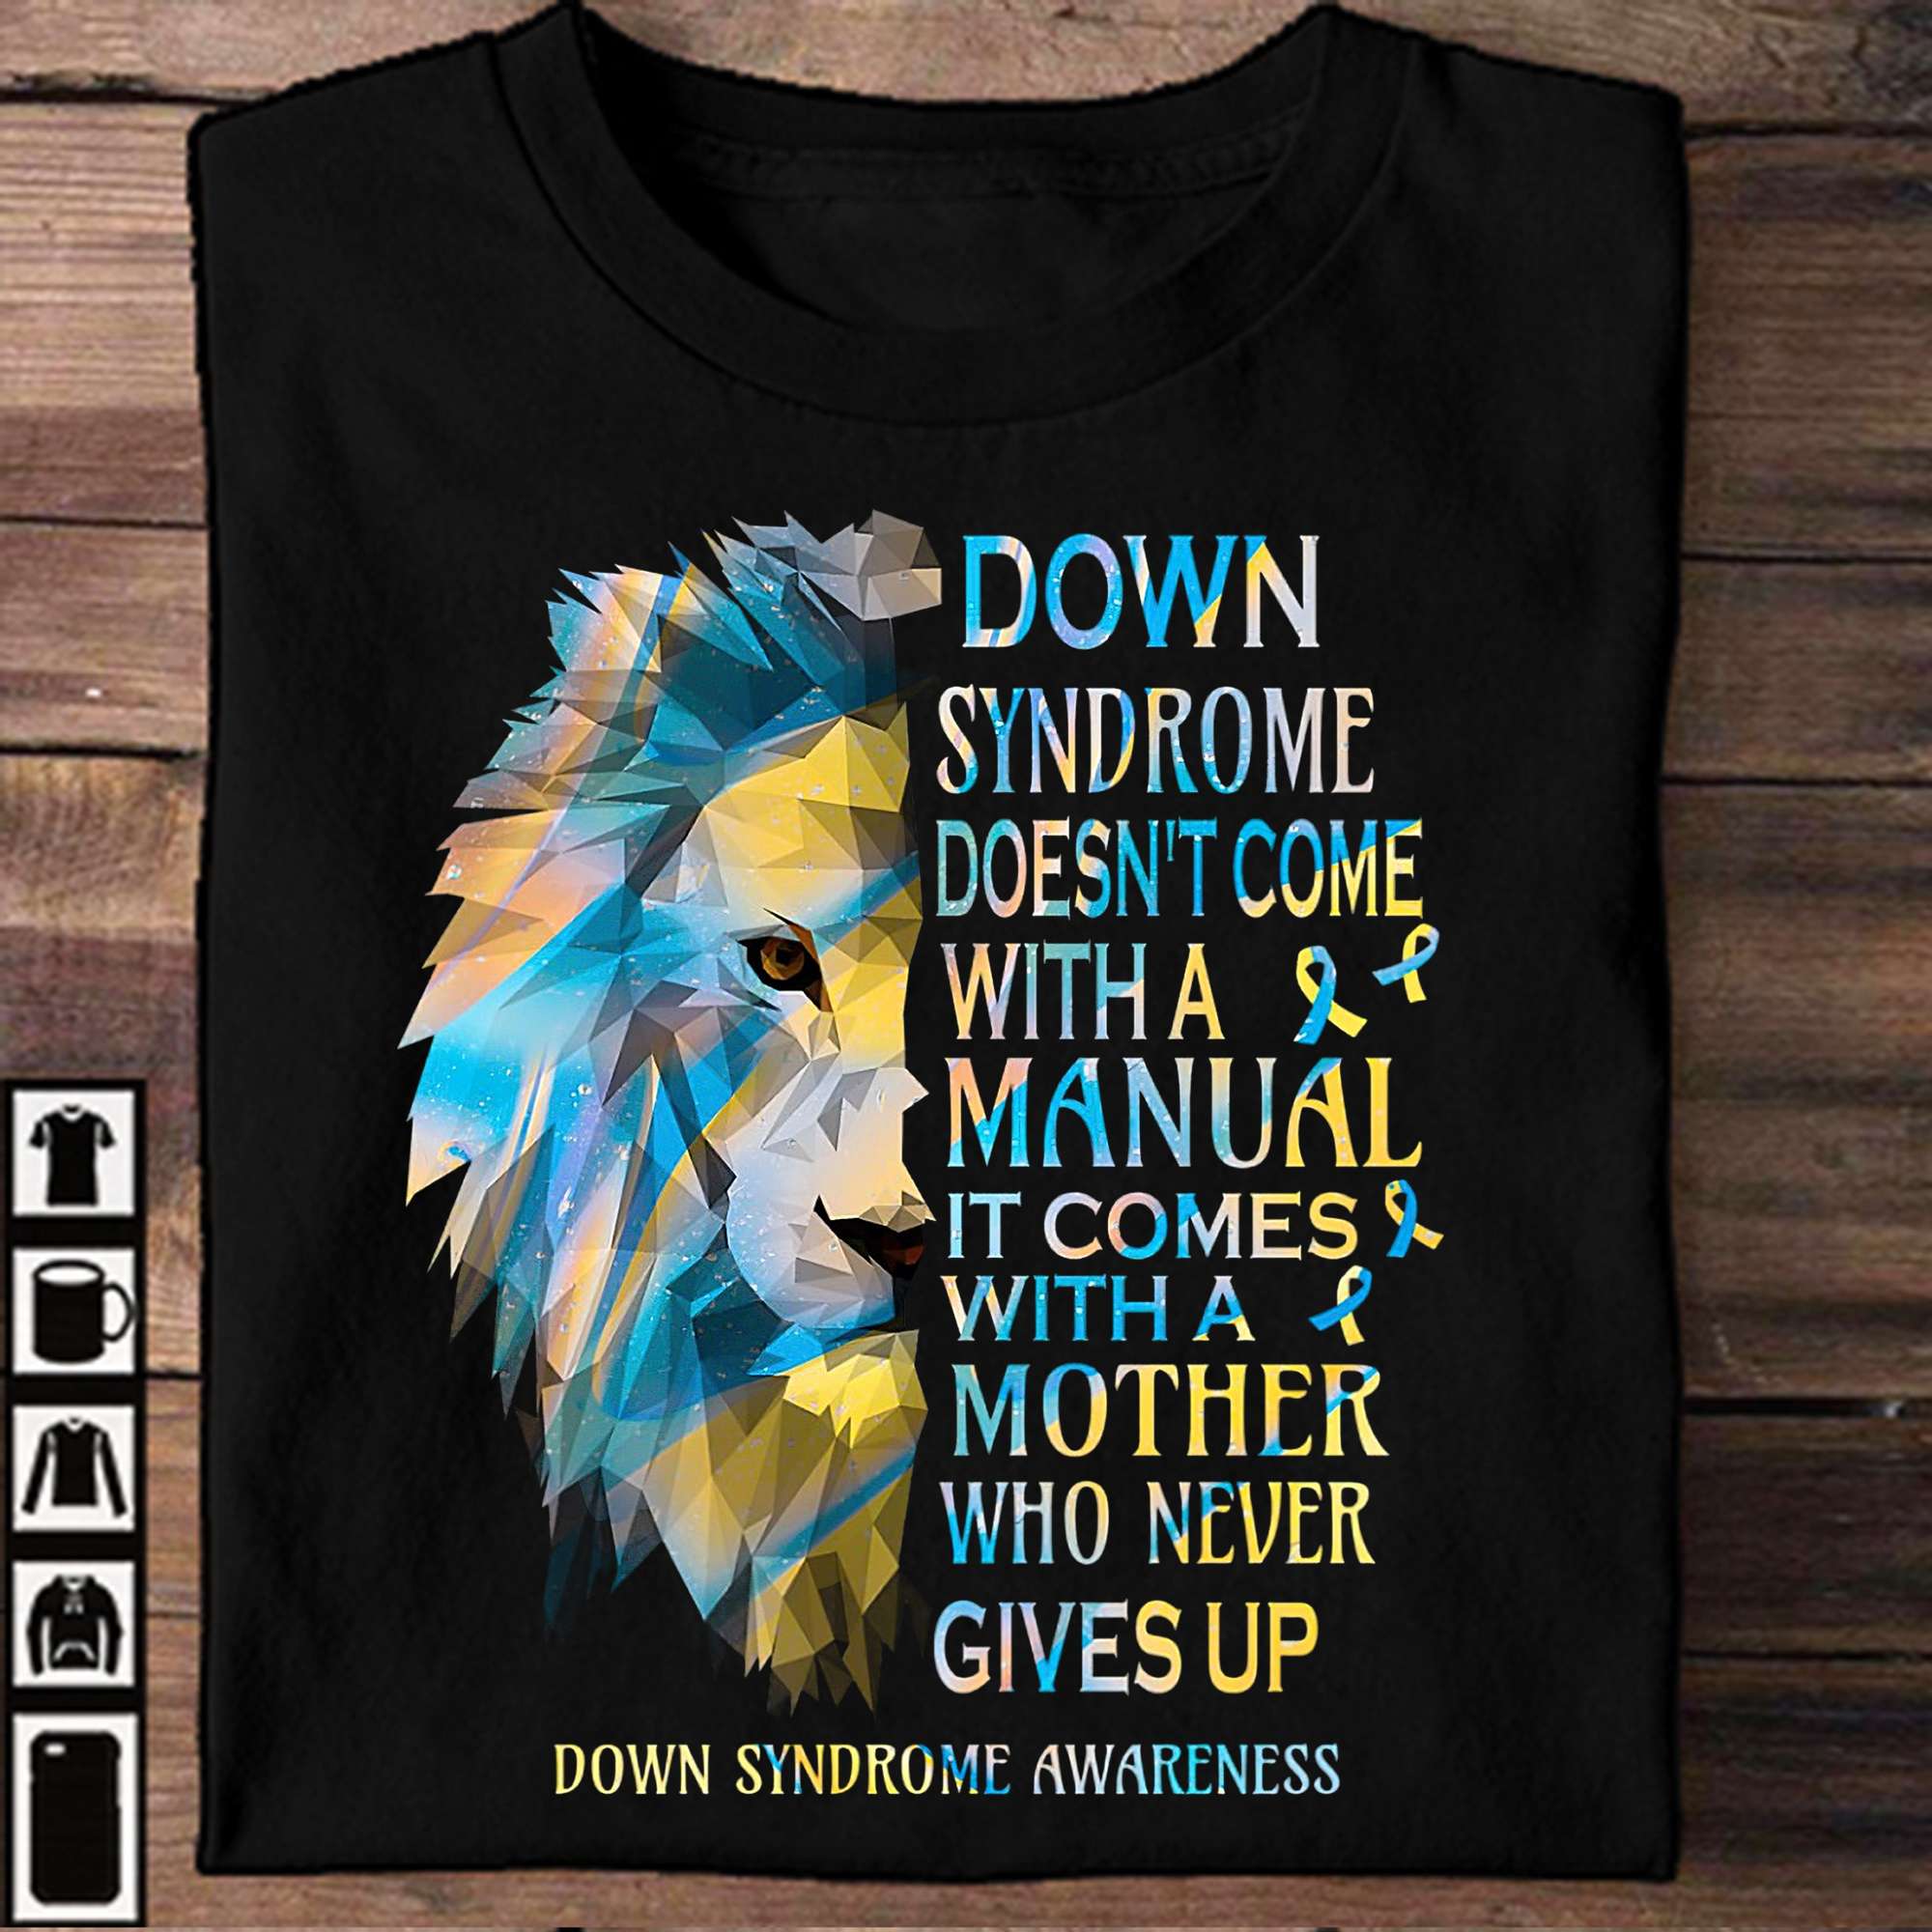 Down Syndrome Lion - Down syndrome doesn't come with a manual it comes with a mother